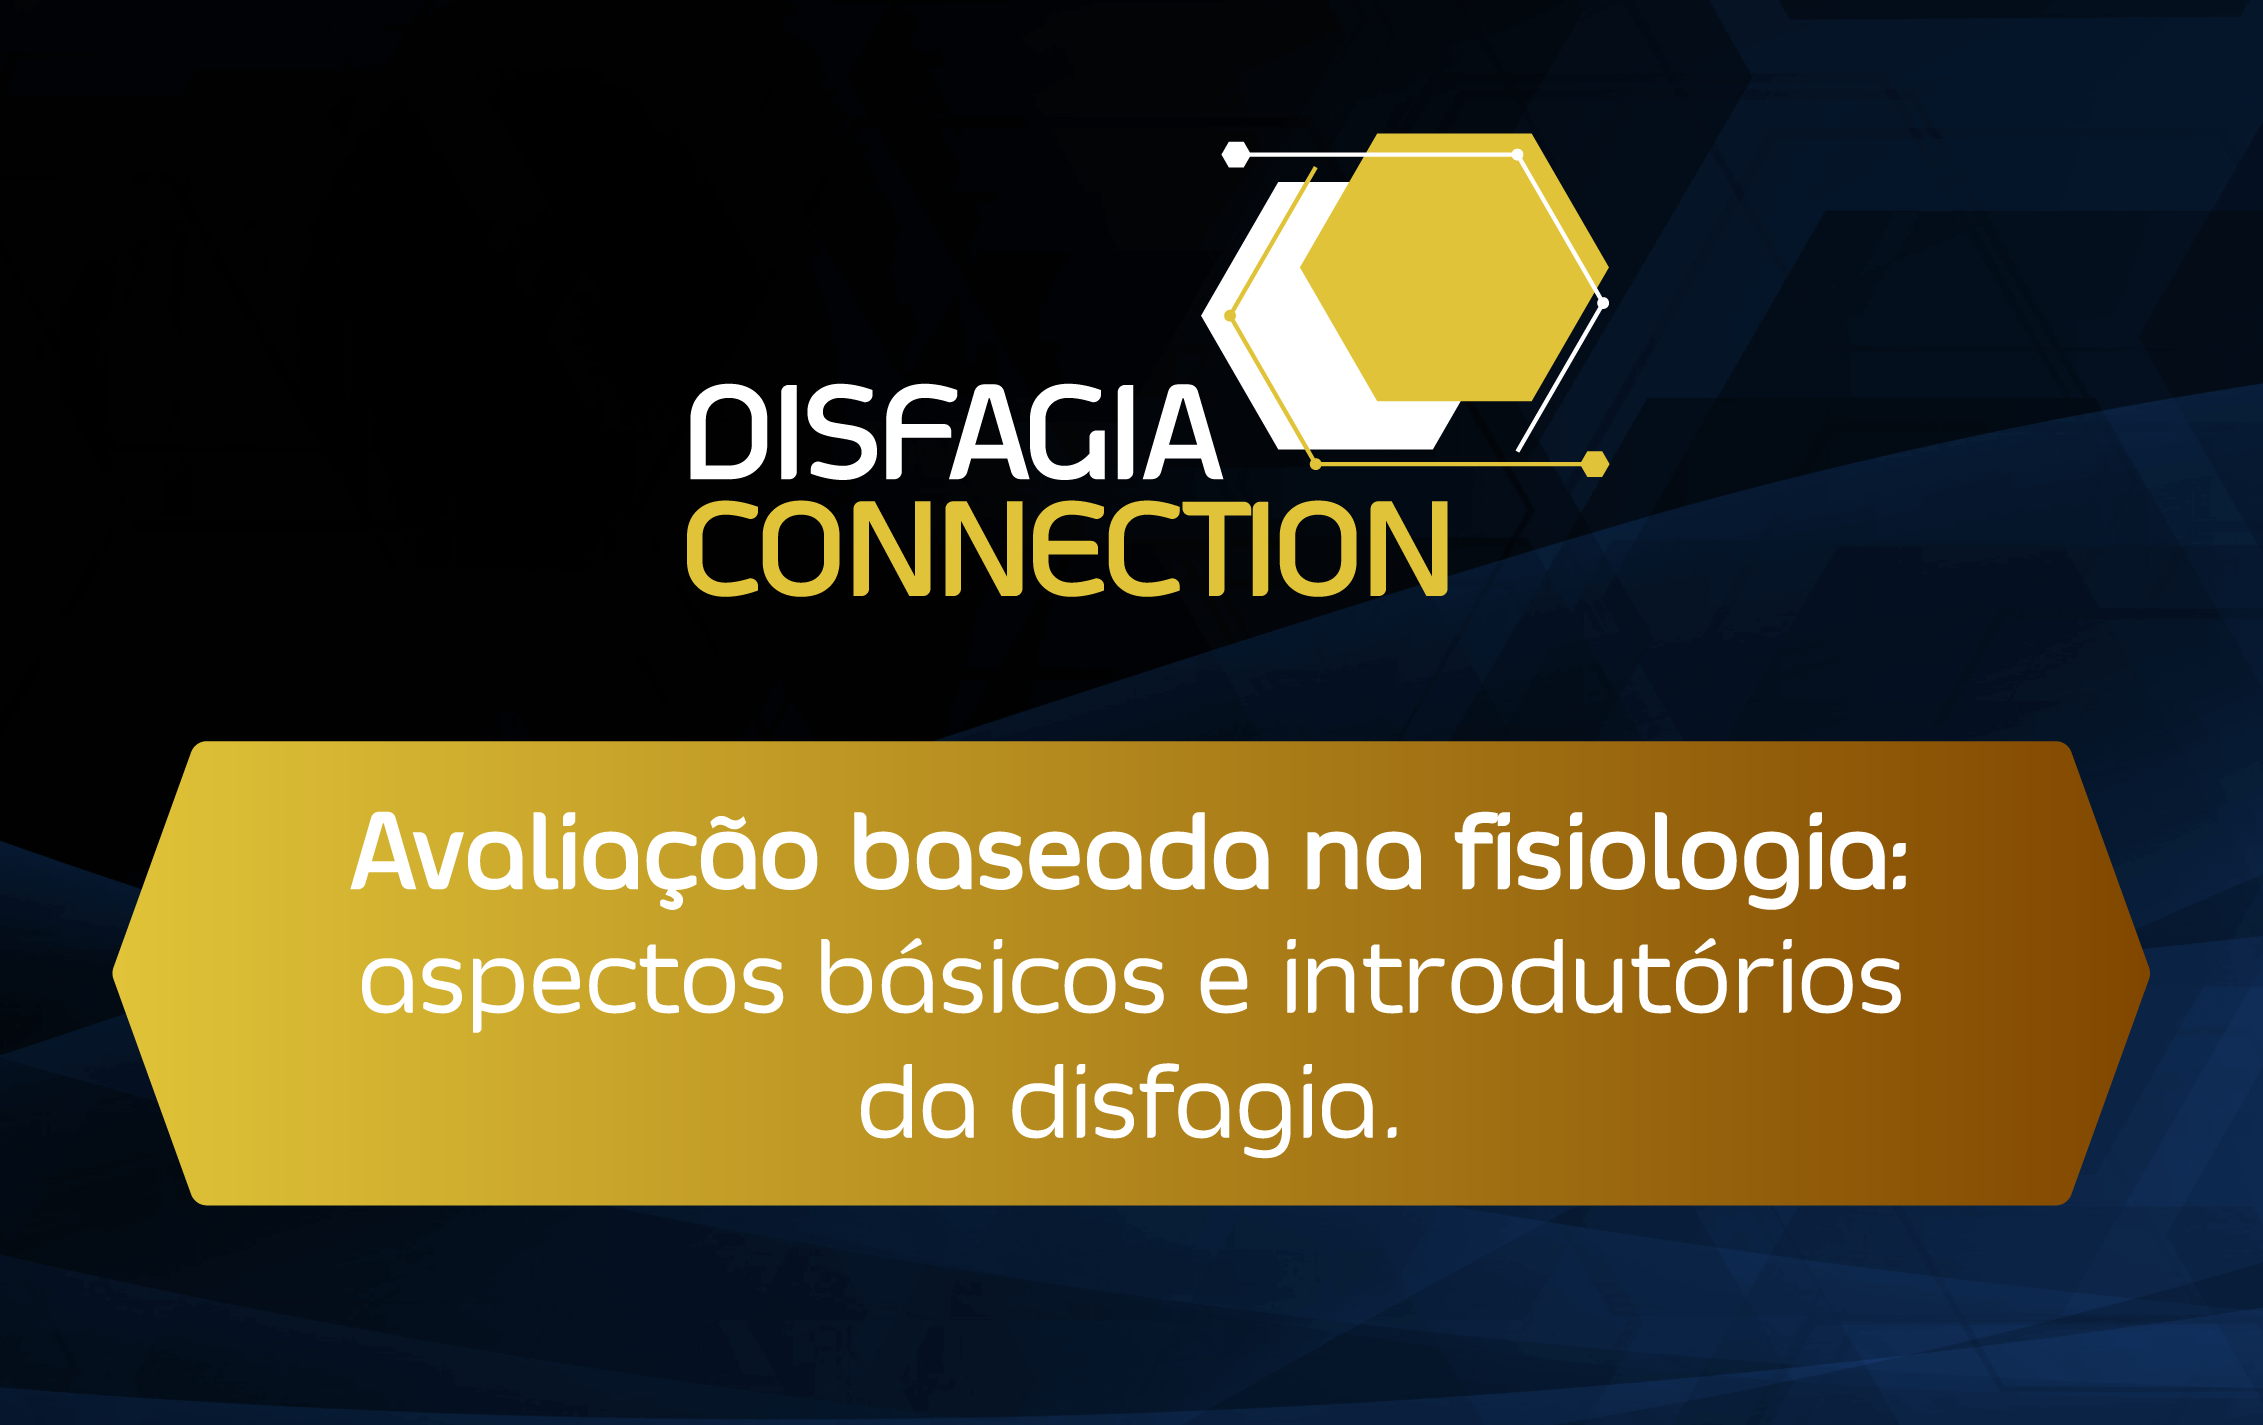 Disfagia Connection: 23/05